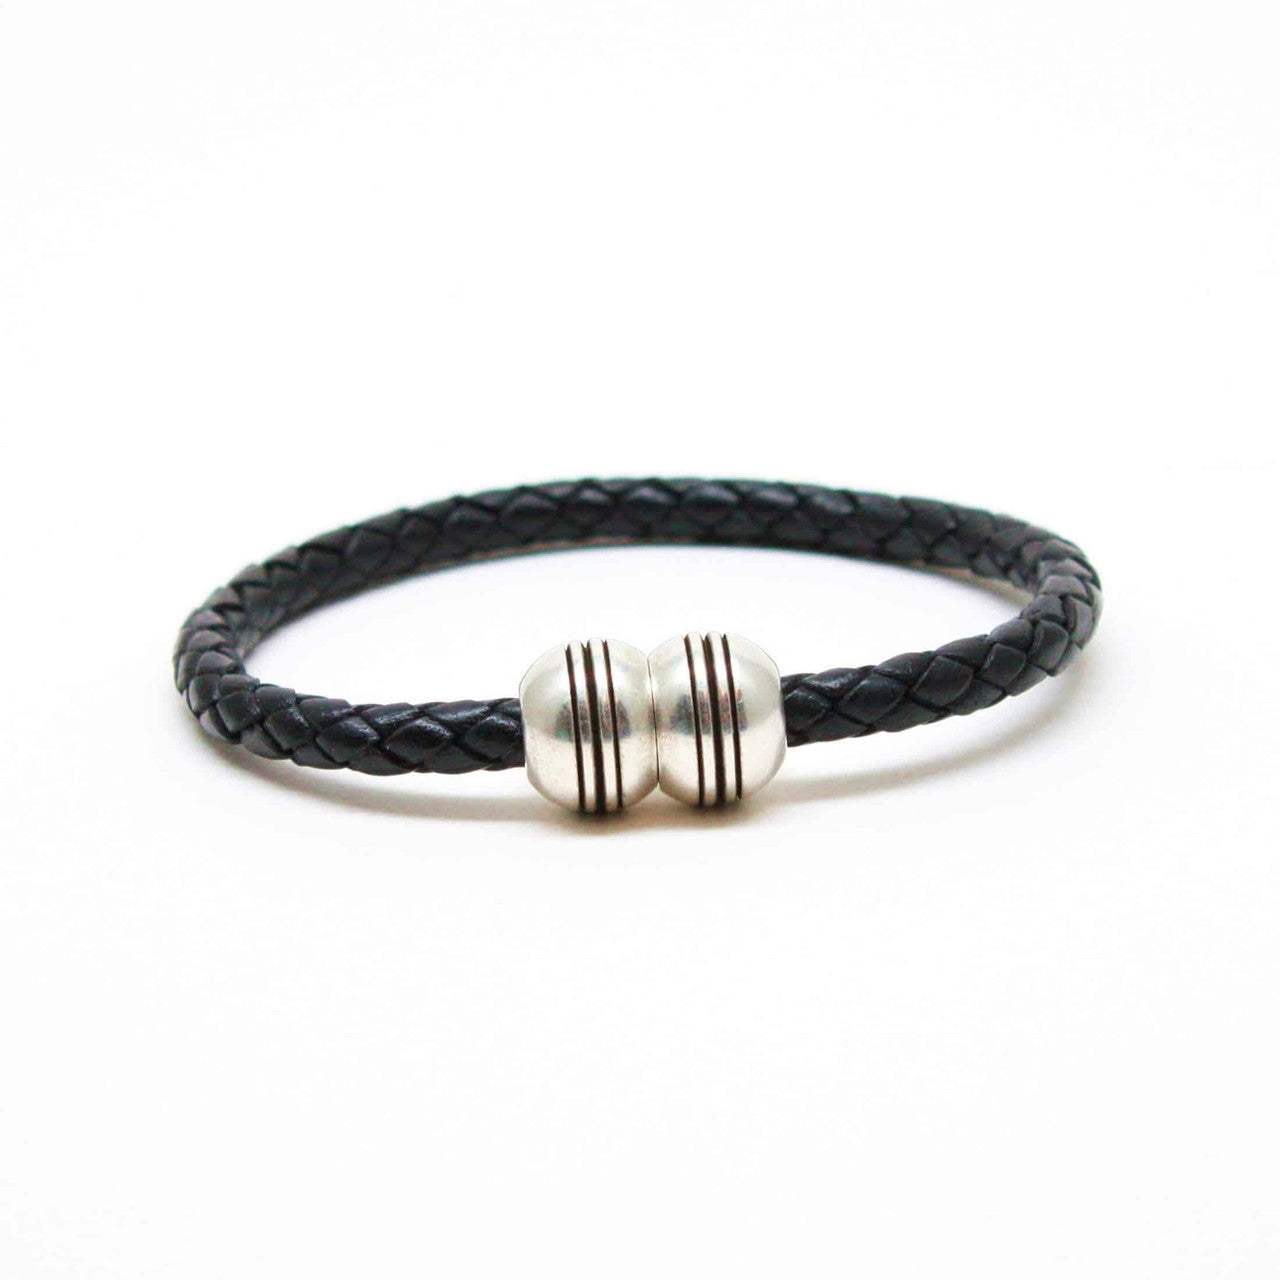 Braided Leather Hemisphere Bracelet in Choice of Colors by Torino Leather